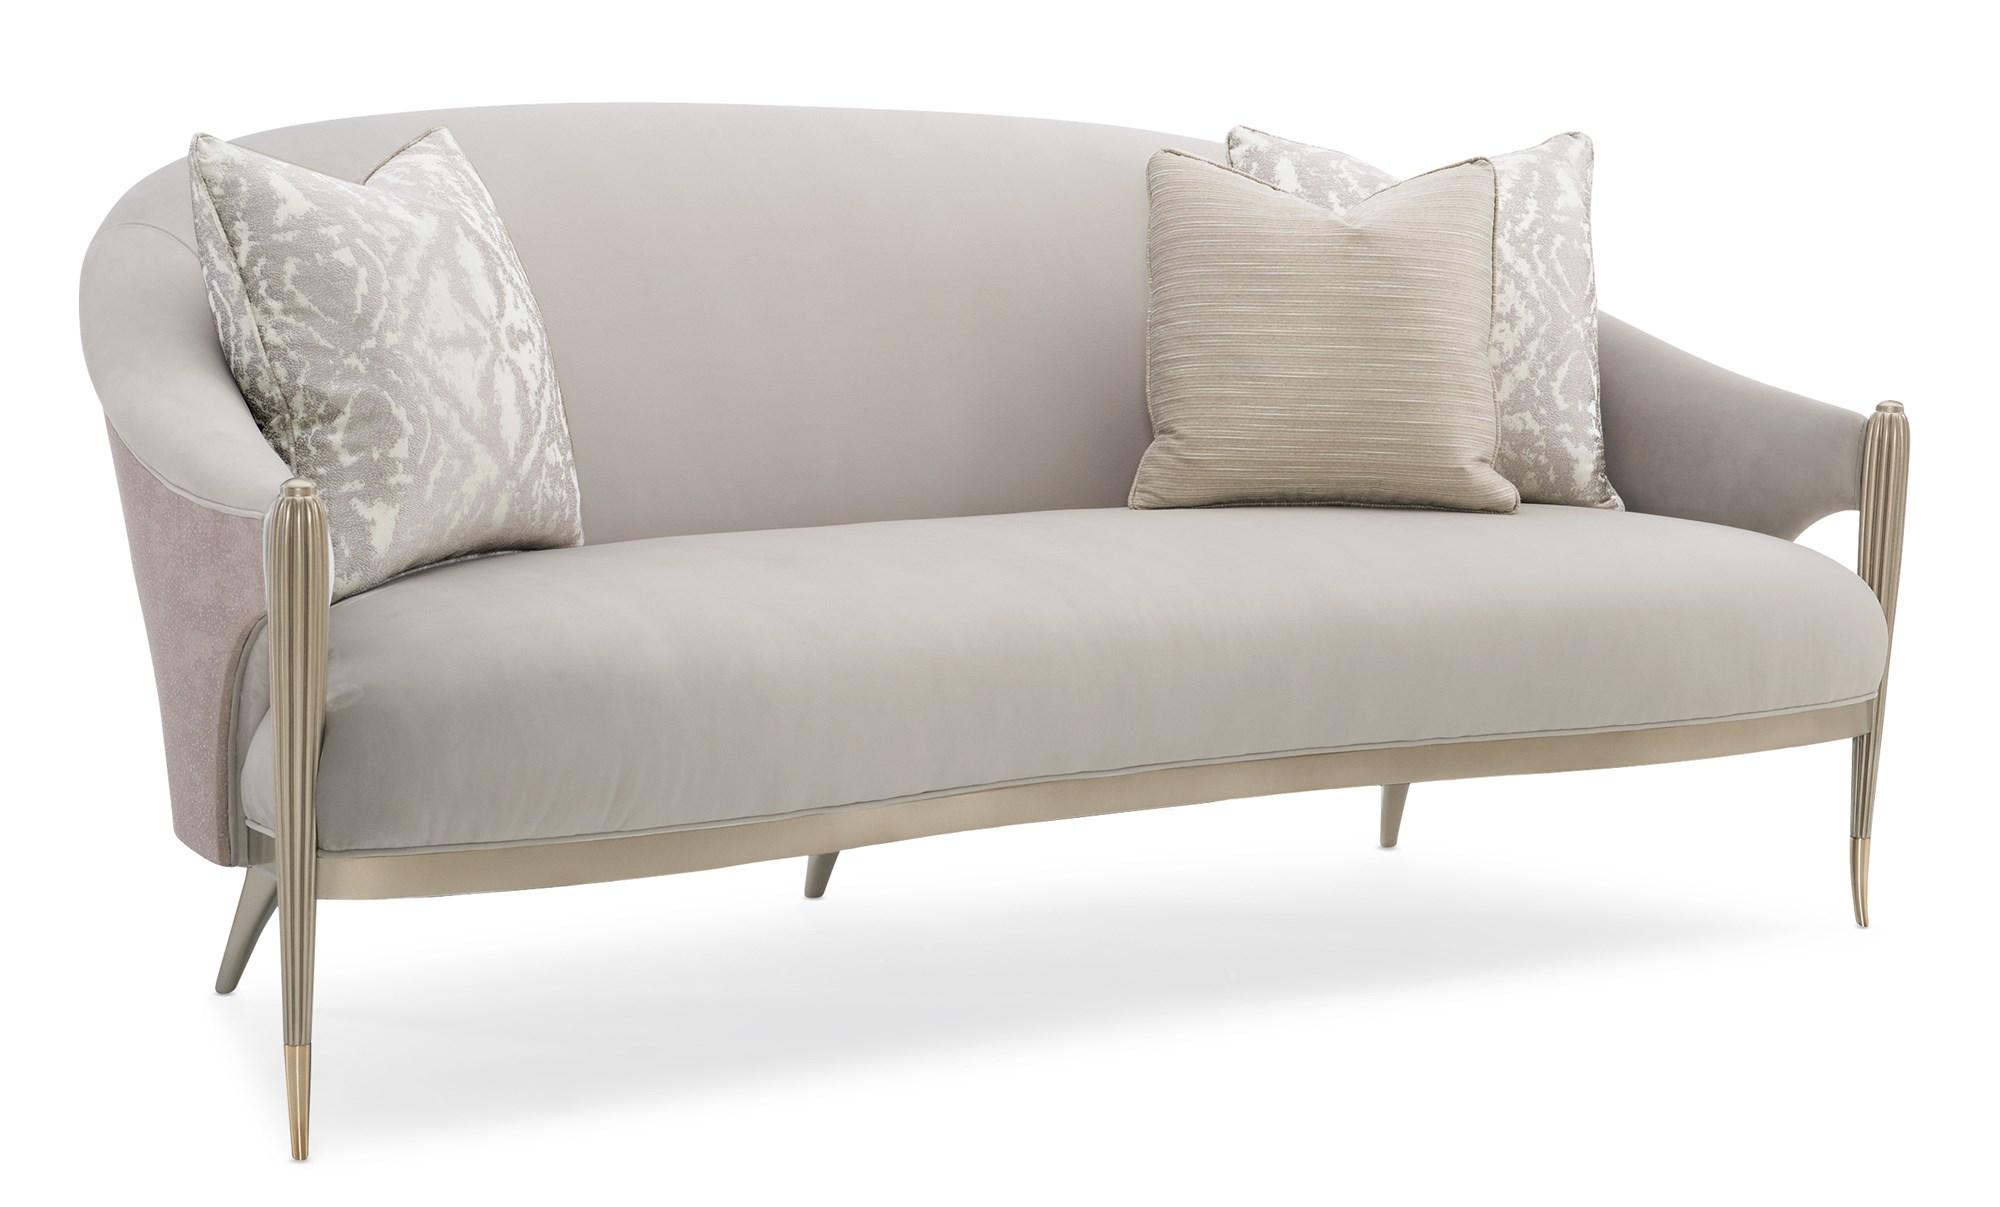 Contemporary Sofa PRETTY LITTLE THING UPH-019-111-A in Light Gray Fabric